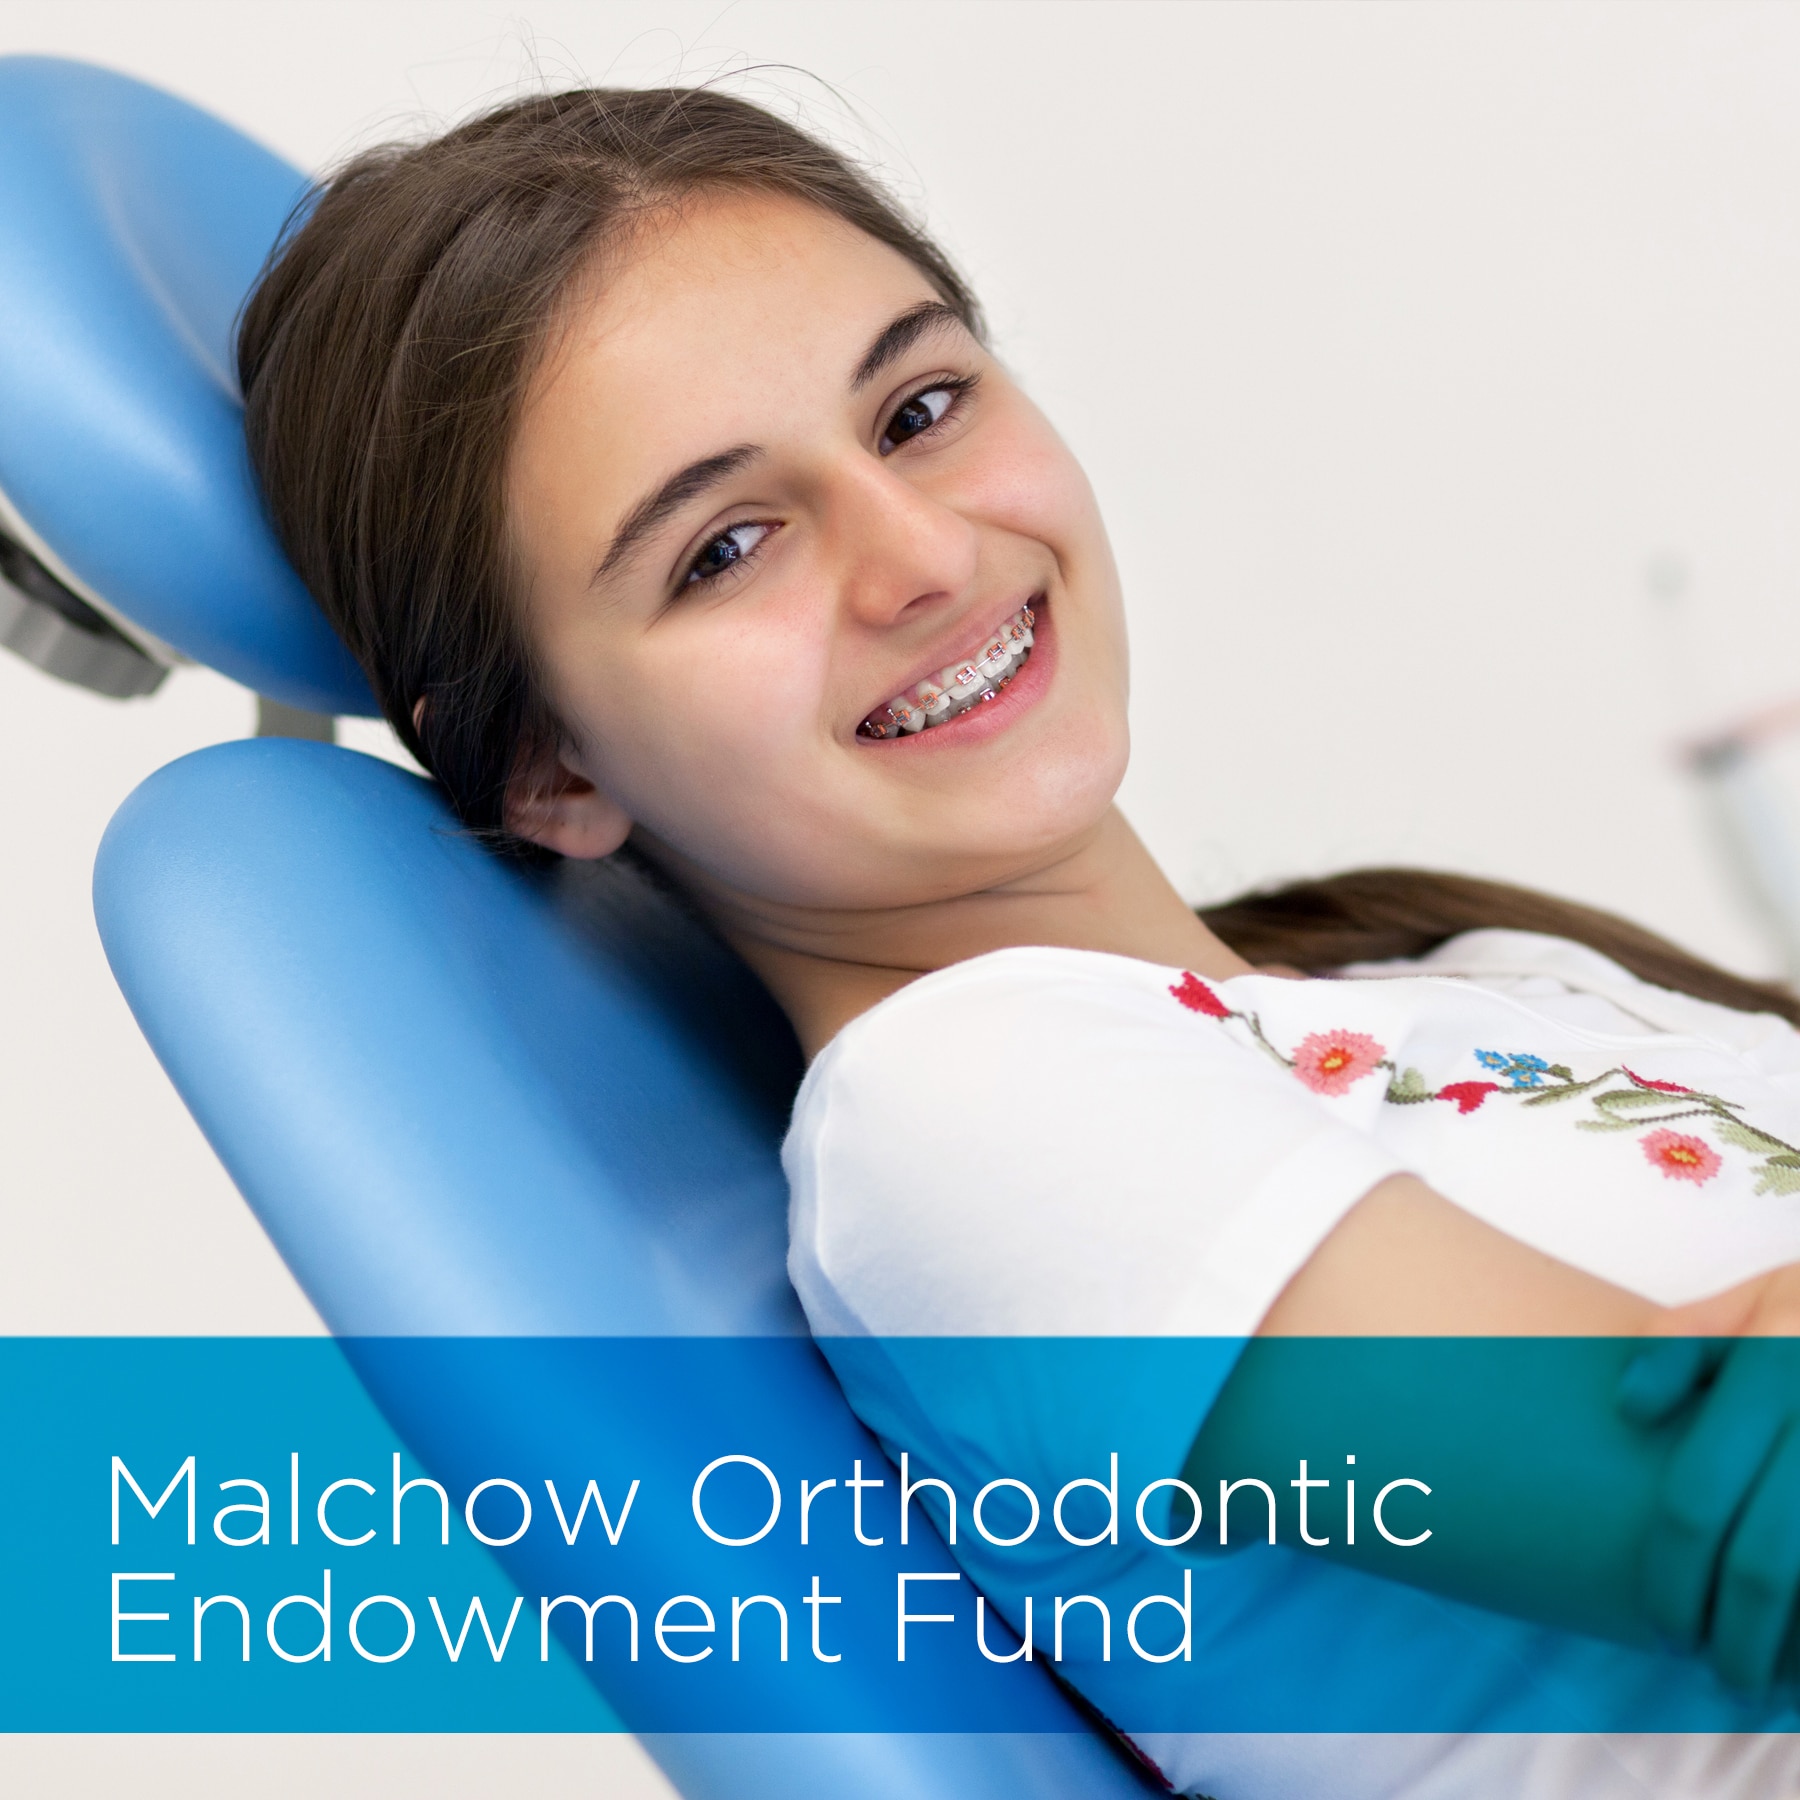 Malchow Endowment Fund featured image